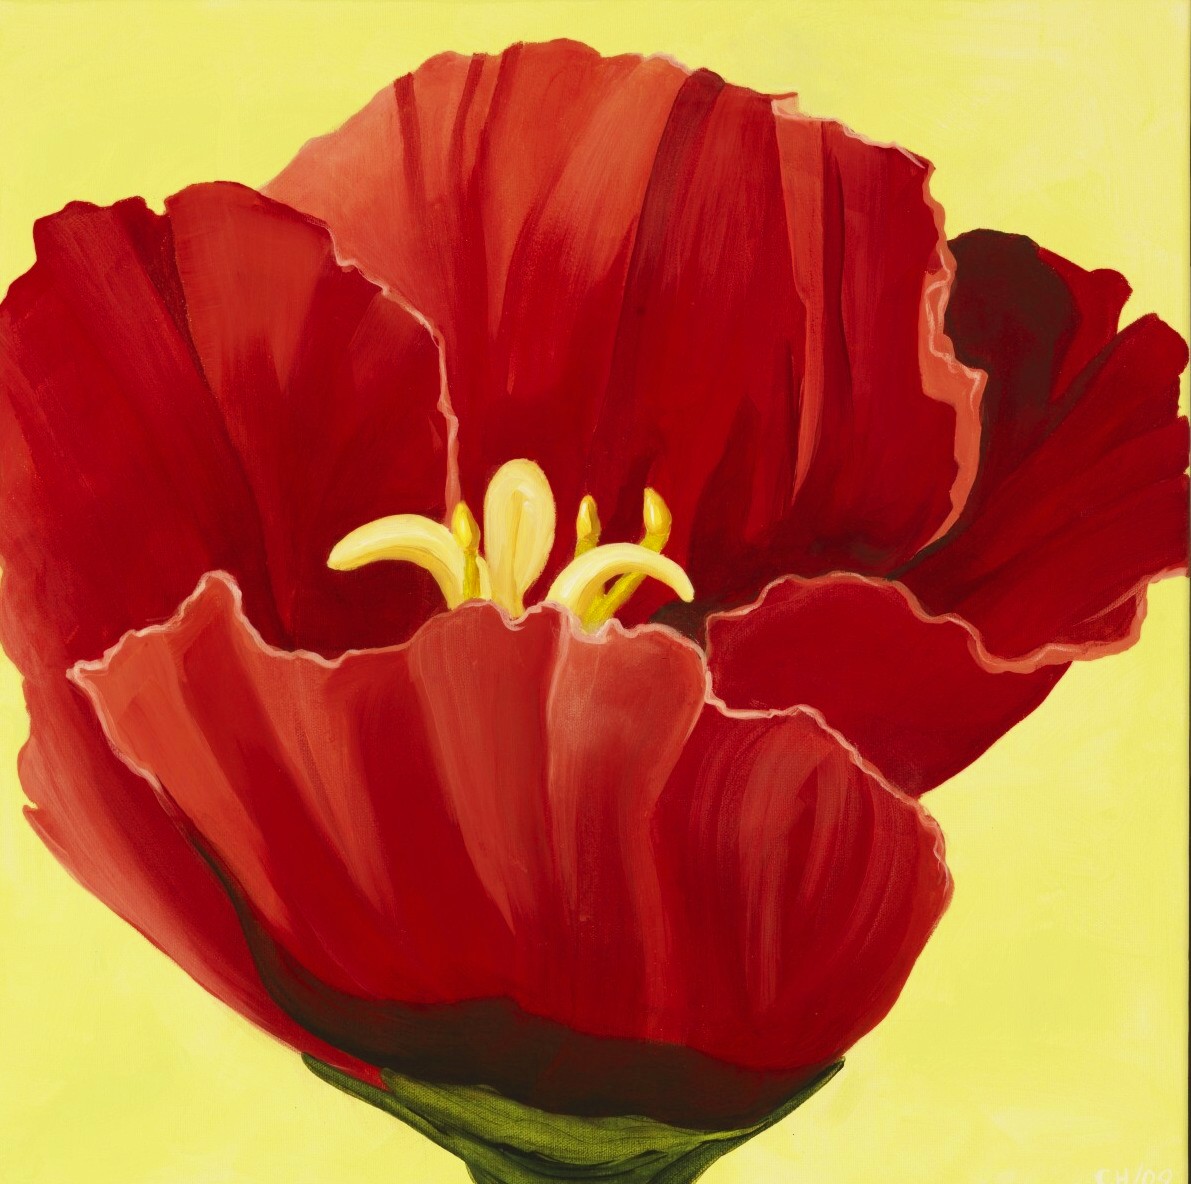 red wildflower 2, acrylic on canvas, 20 by 20", 2009